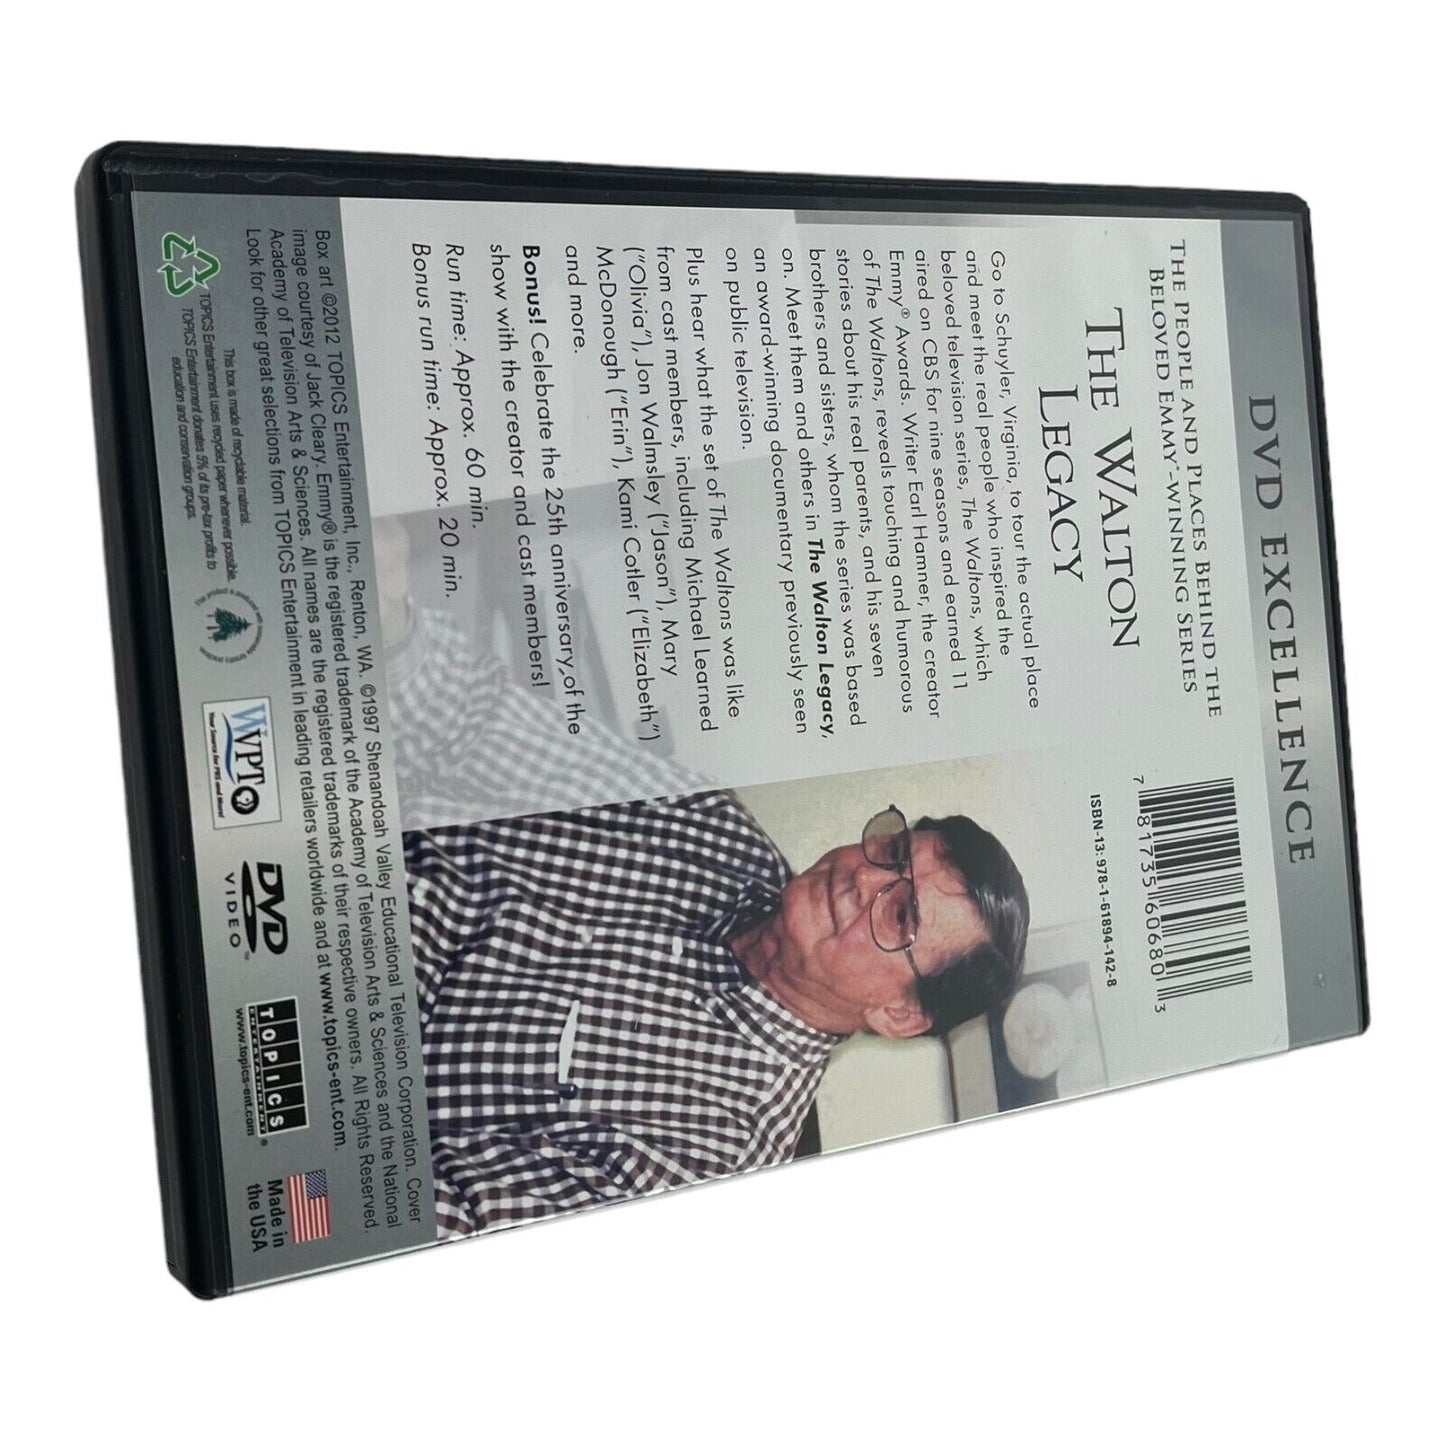 The Walton Legacy DVD As Seen on Public Television with Slipcover